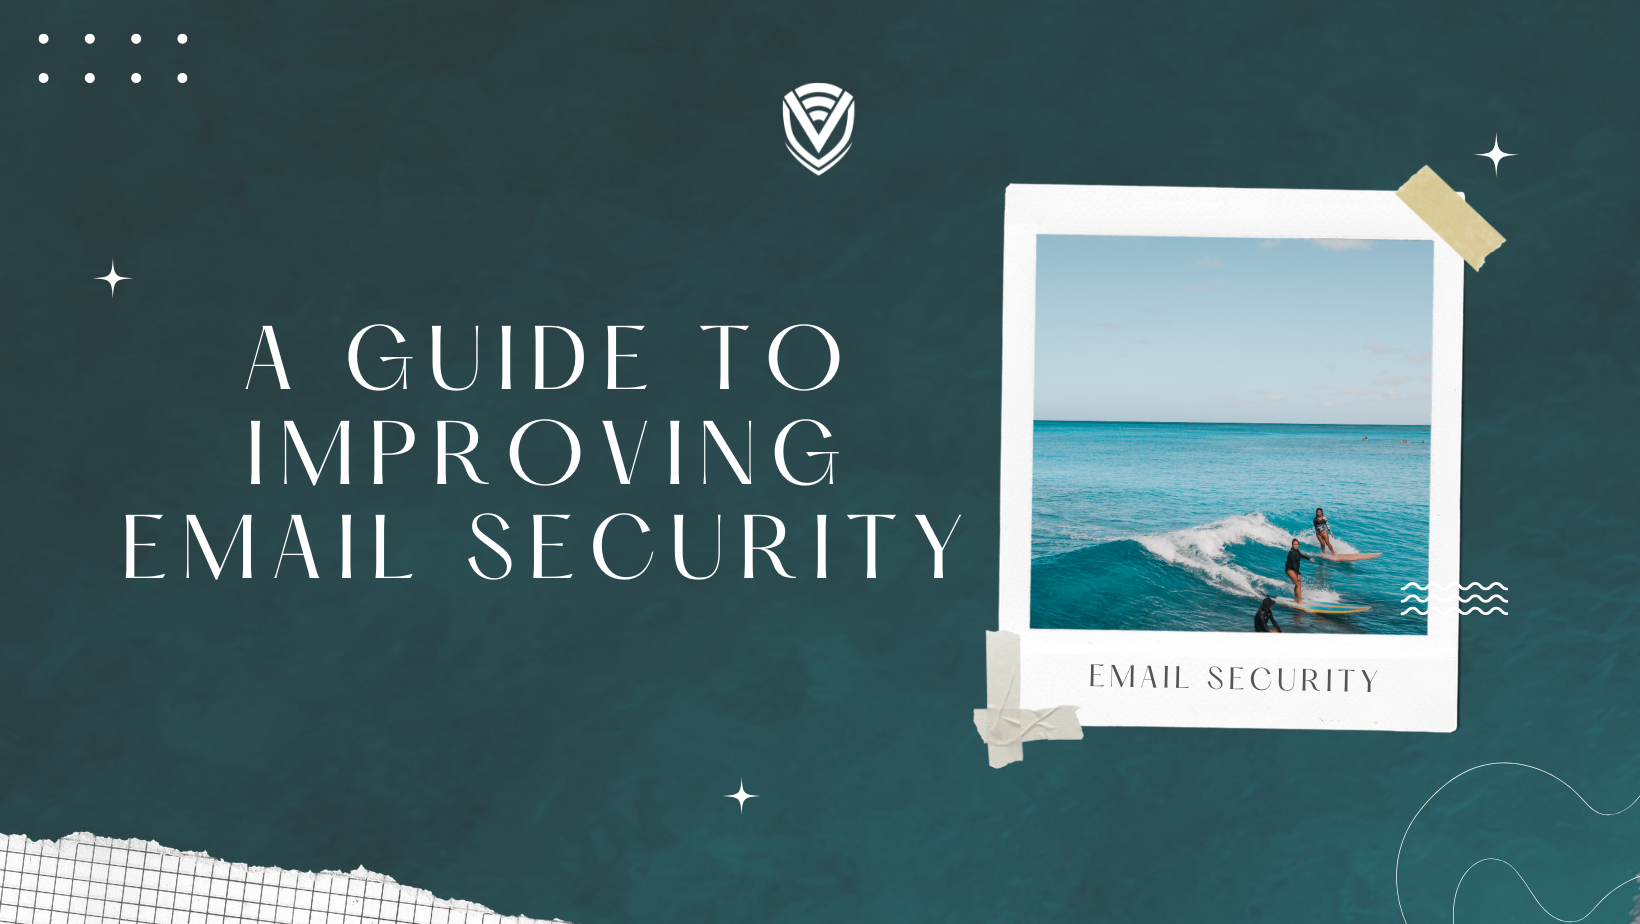 A Guide to Improving Email Security